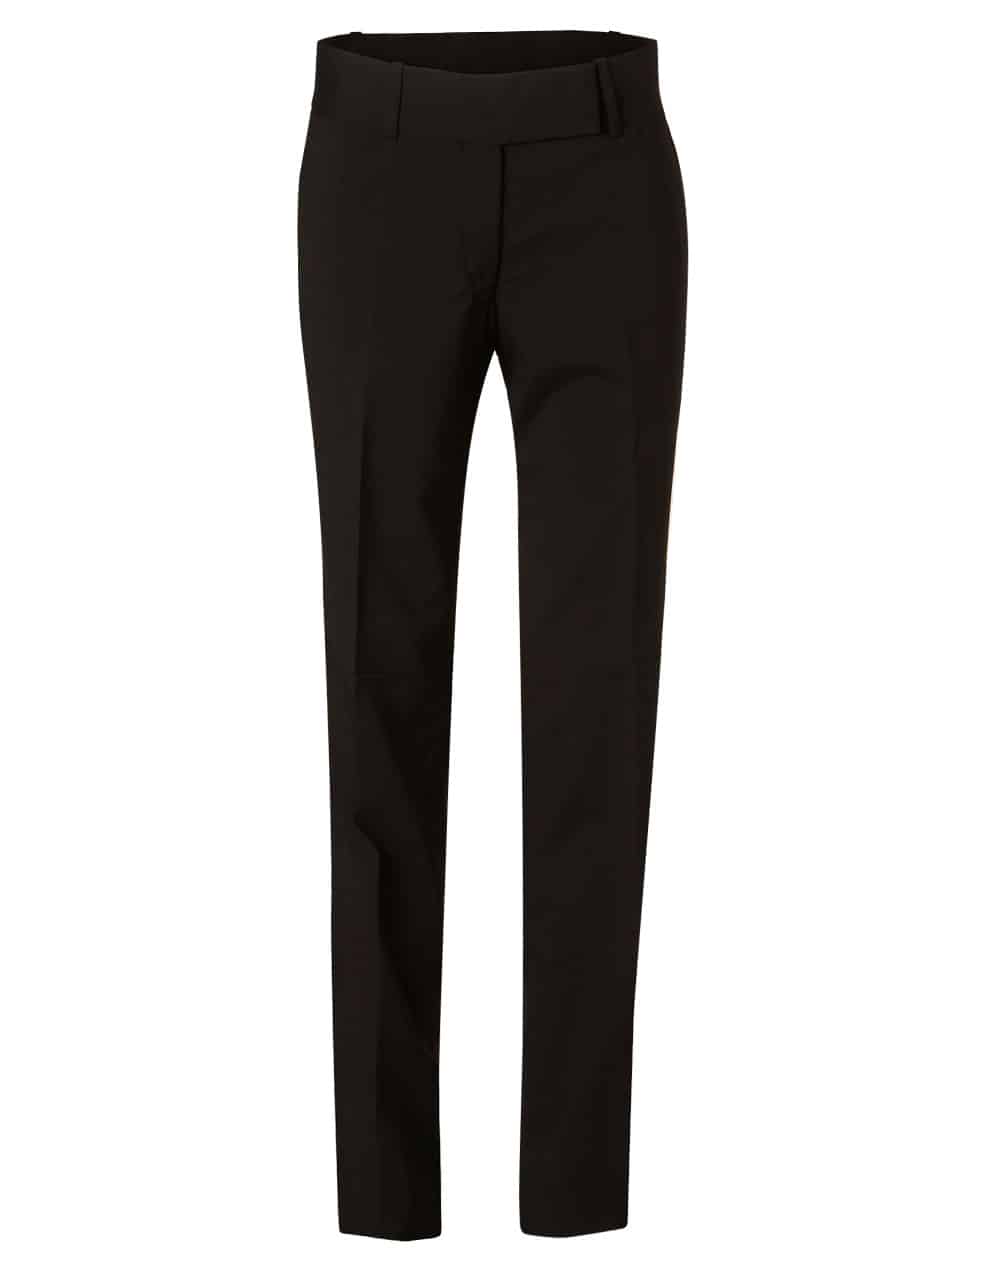 Benchmark M9410 Womens Wool Blend Stretch Low Rise Pants